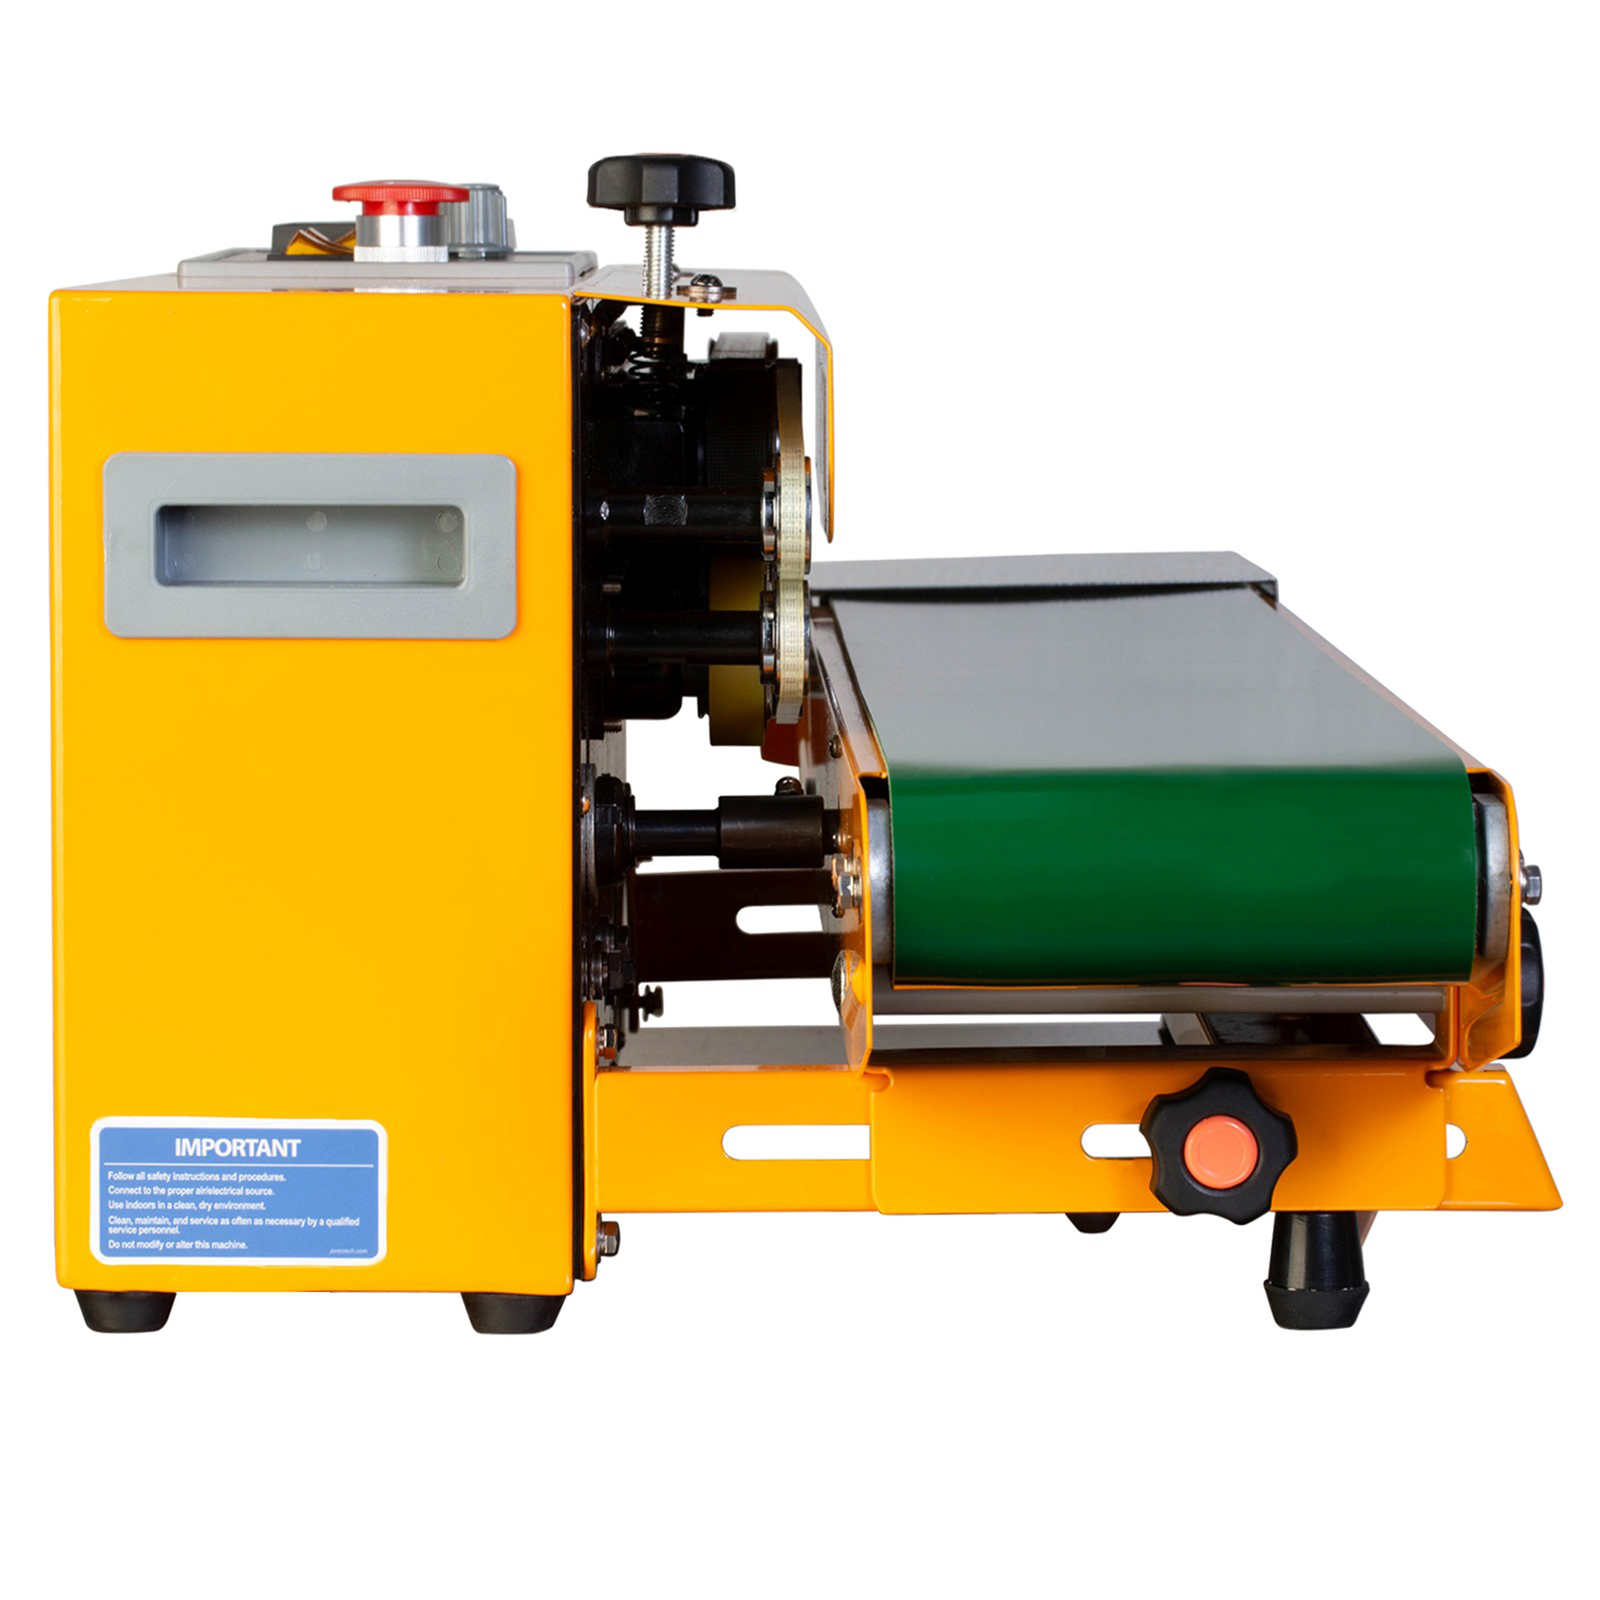 side view of the JORES TECHNOLOGIES® yellow continuous band sealing machine with green band in collapsed horizontal position